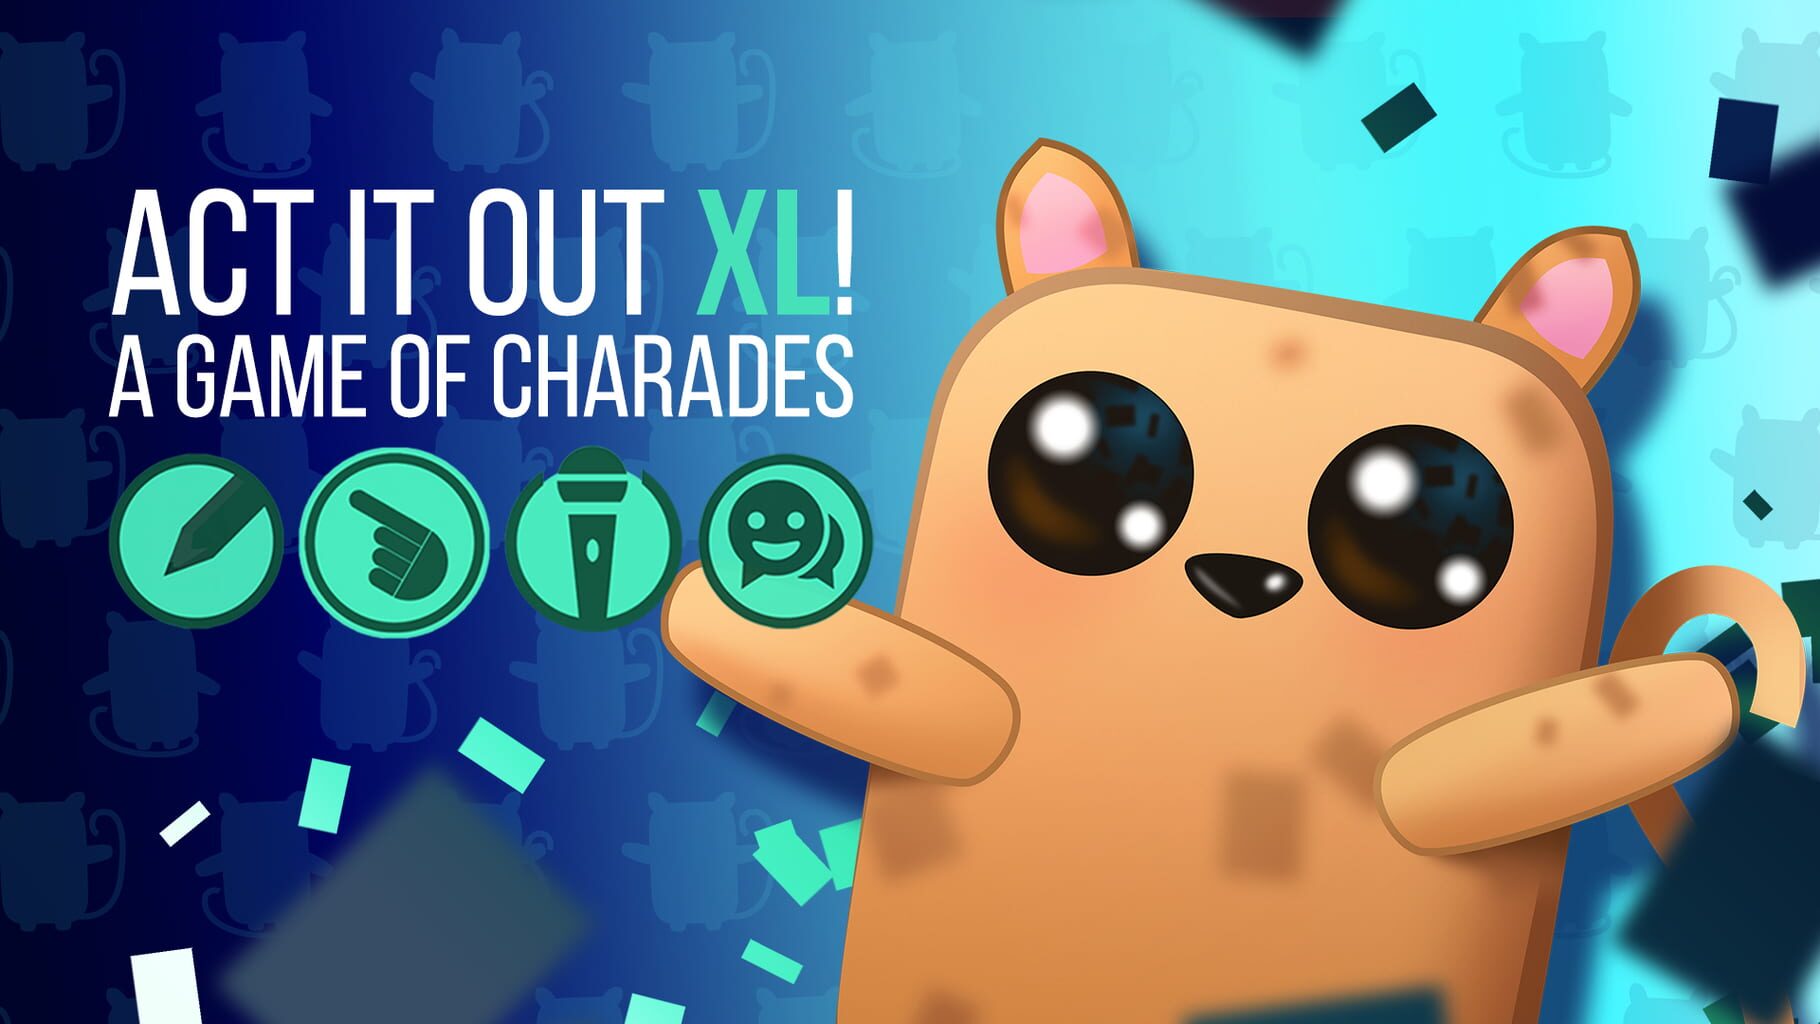 Act it Out XL!: A Game of Charades artwork